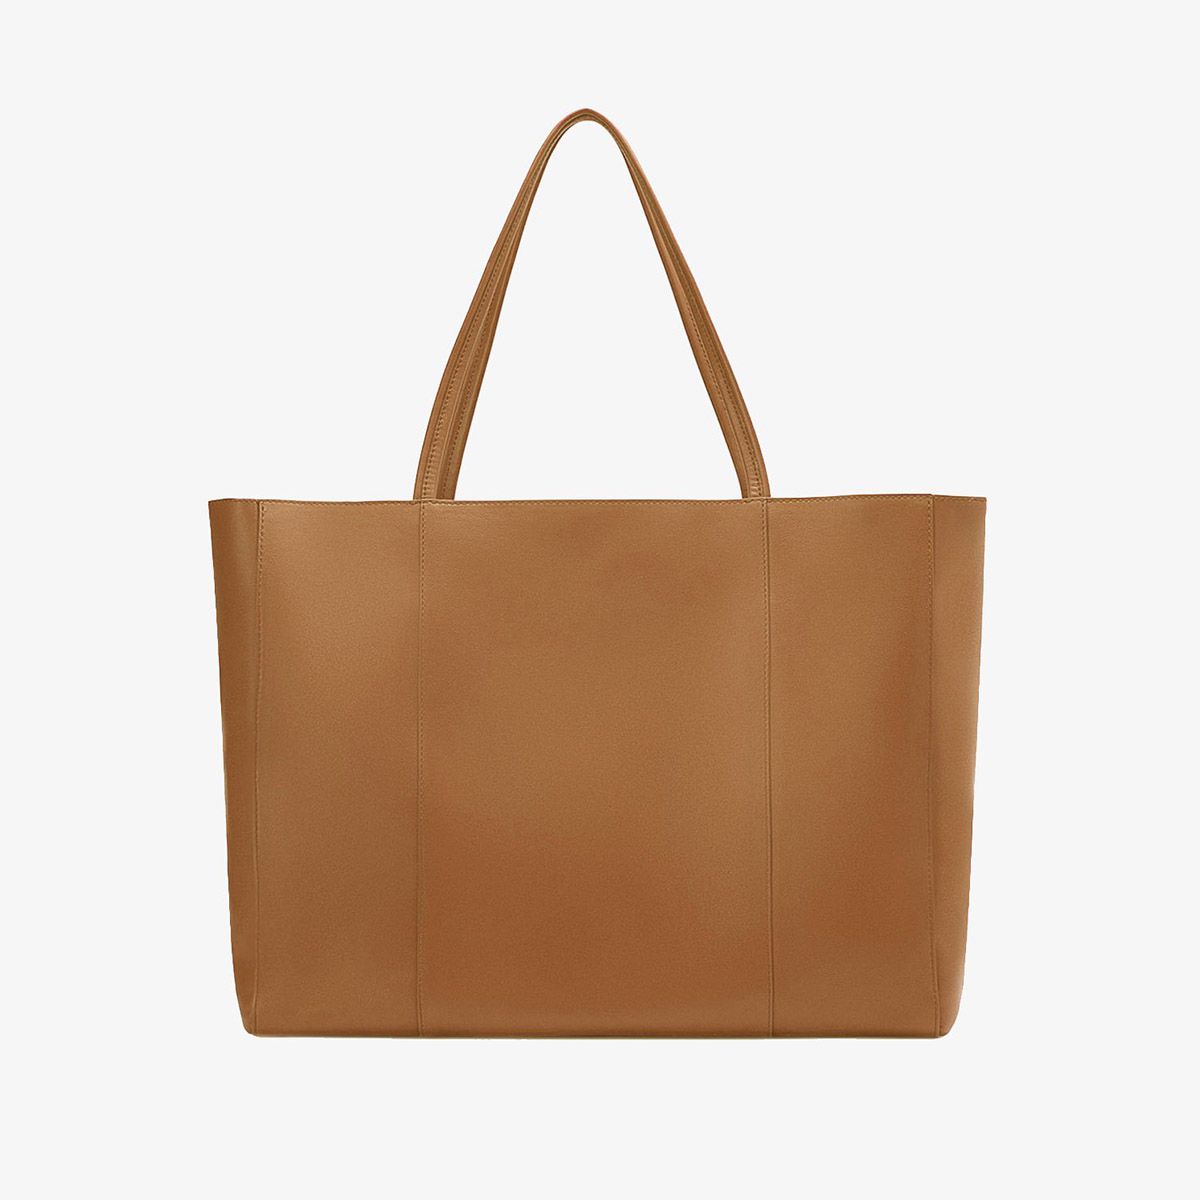 italic-affordable-luxury-leather-bags